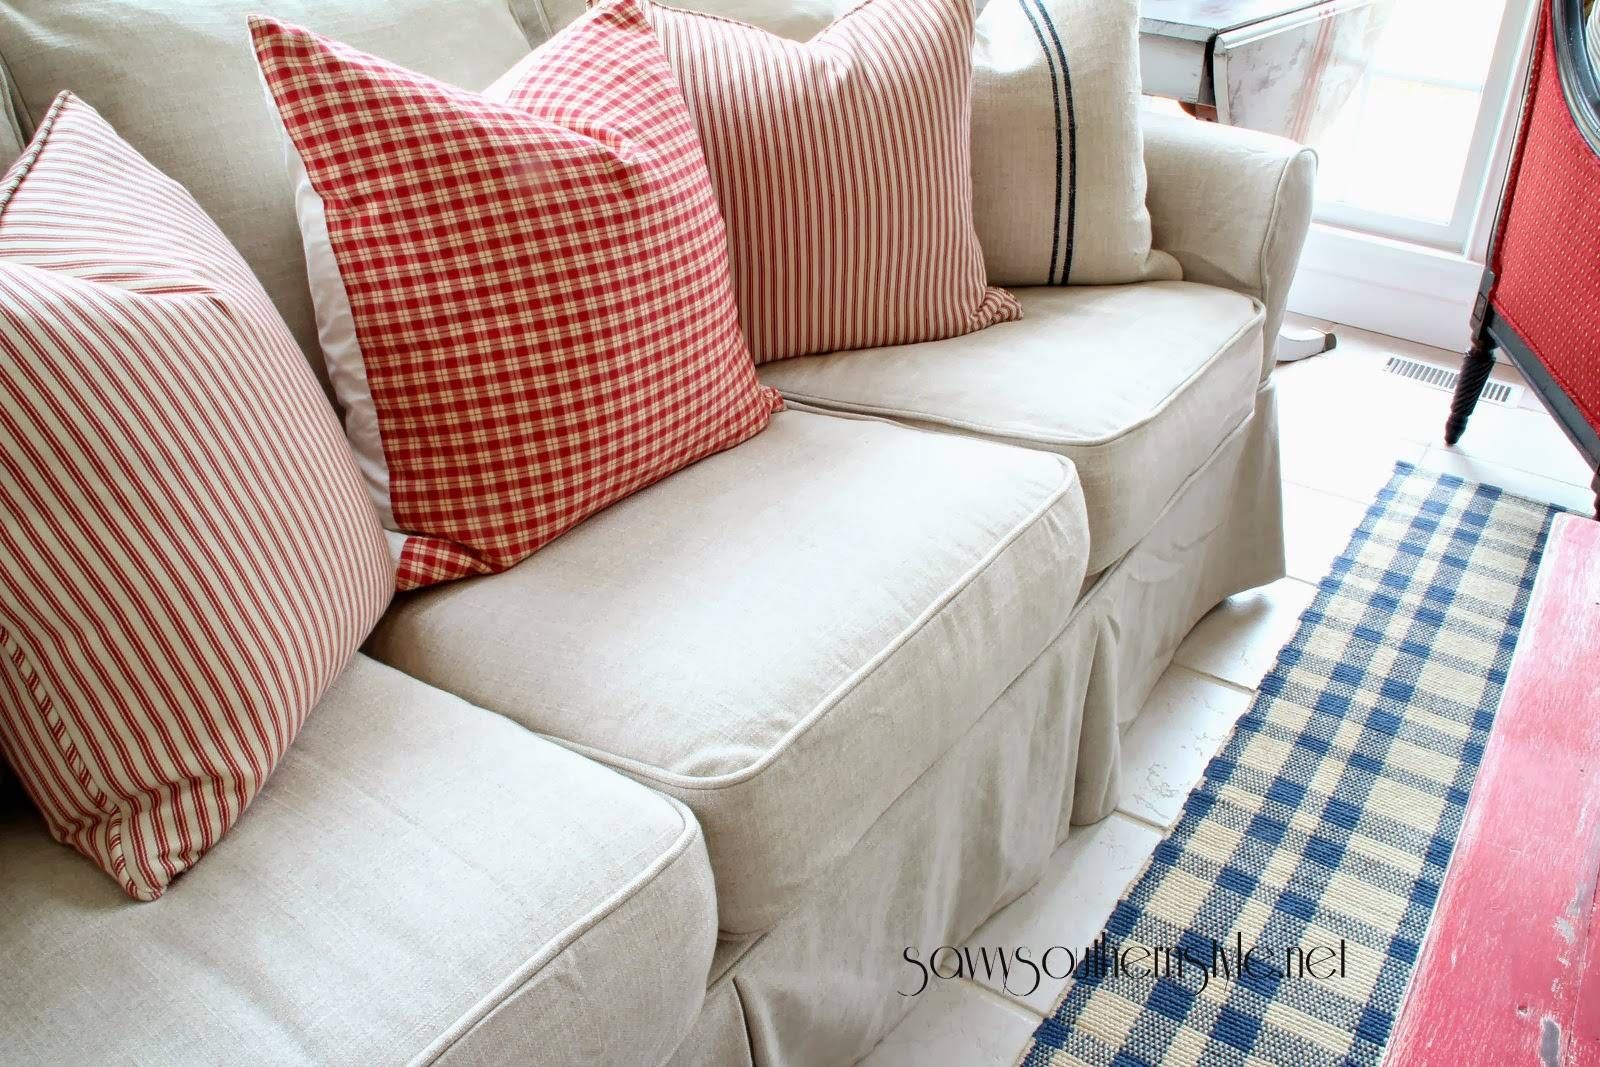 Custom Slipcovers And Couch Cover For Any Sofa Online With Regard To Canvas Slipcover Sofas (View 5 of 15)